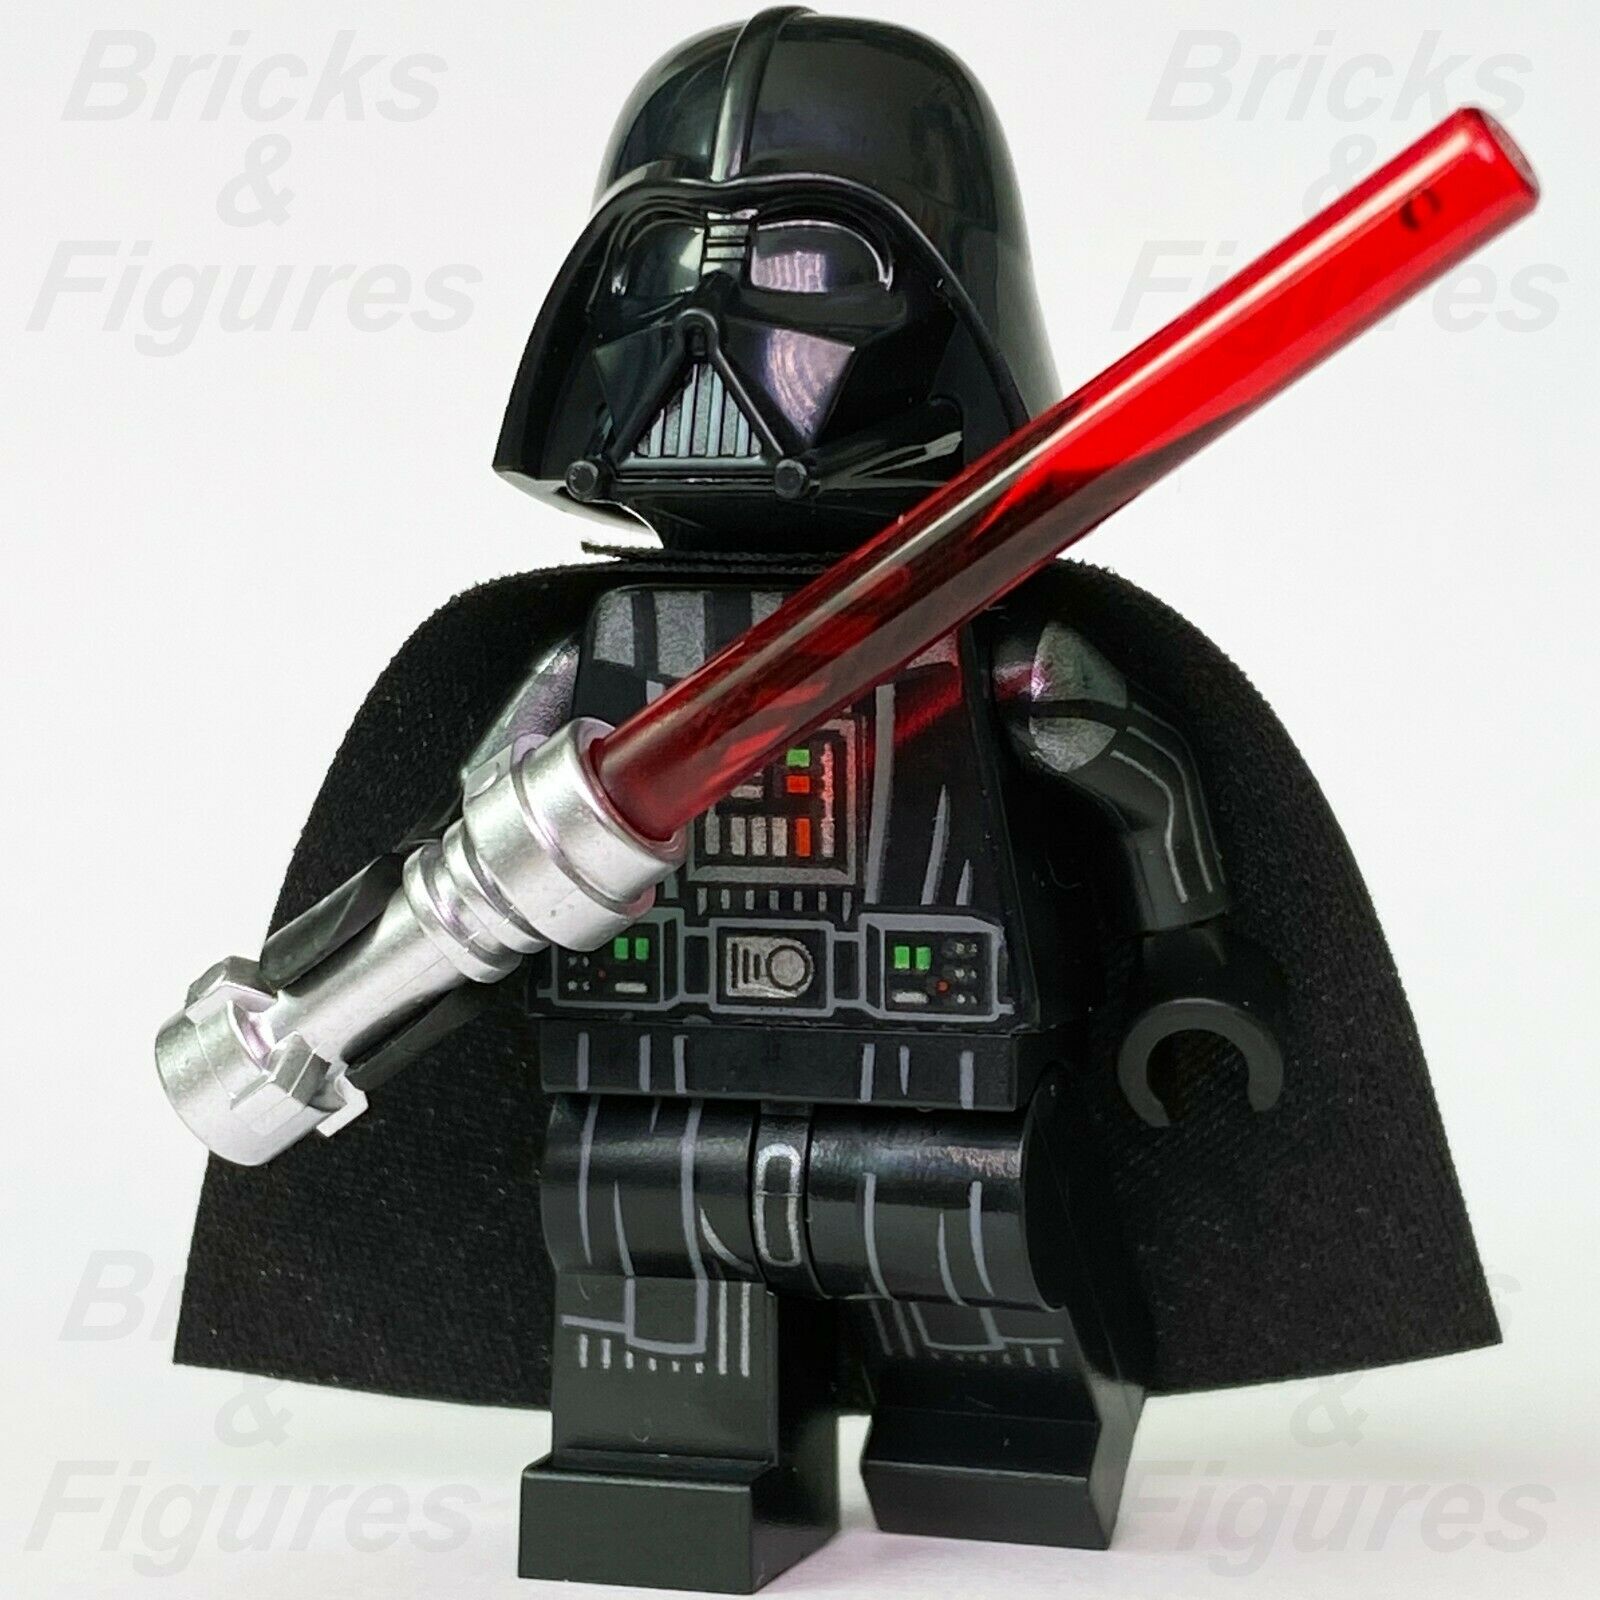 Star Wars LEGO Darth Vader Sith Lord with Printed Arms Minifigure 75294 - Bricks & Figures